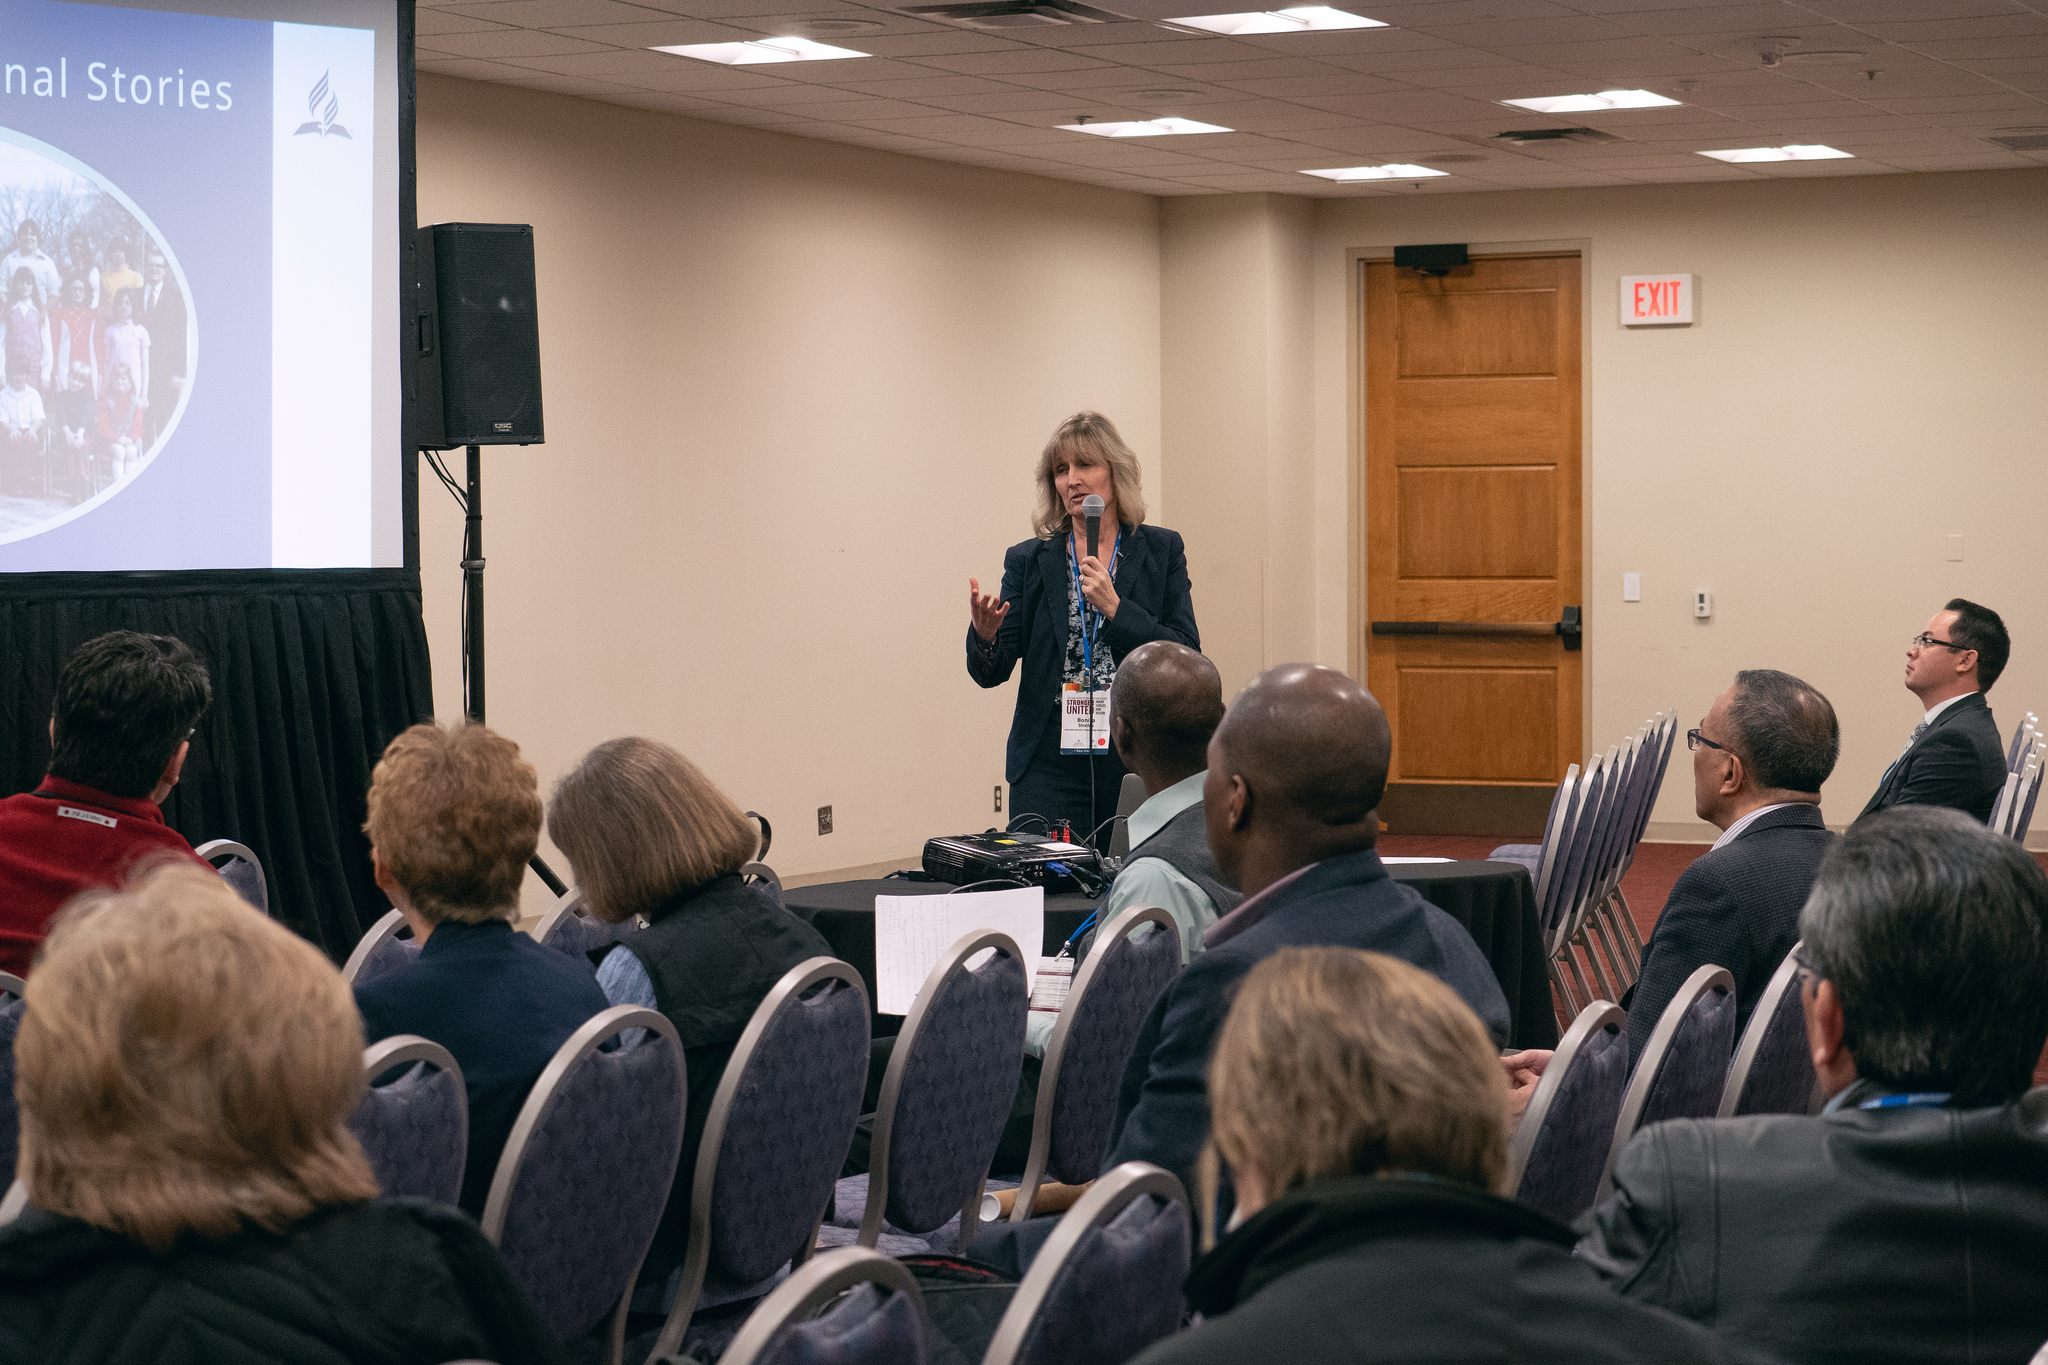 Bonita Joyner Shields, new NAD Stewardship director, presents a breakout session on stewardship during the 2019 Adventist Ministries Convention. Photo by Pieter Damsteegt